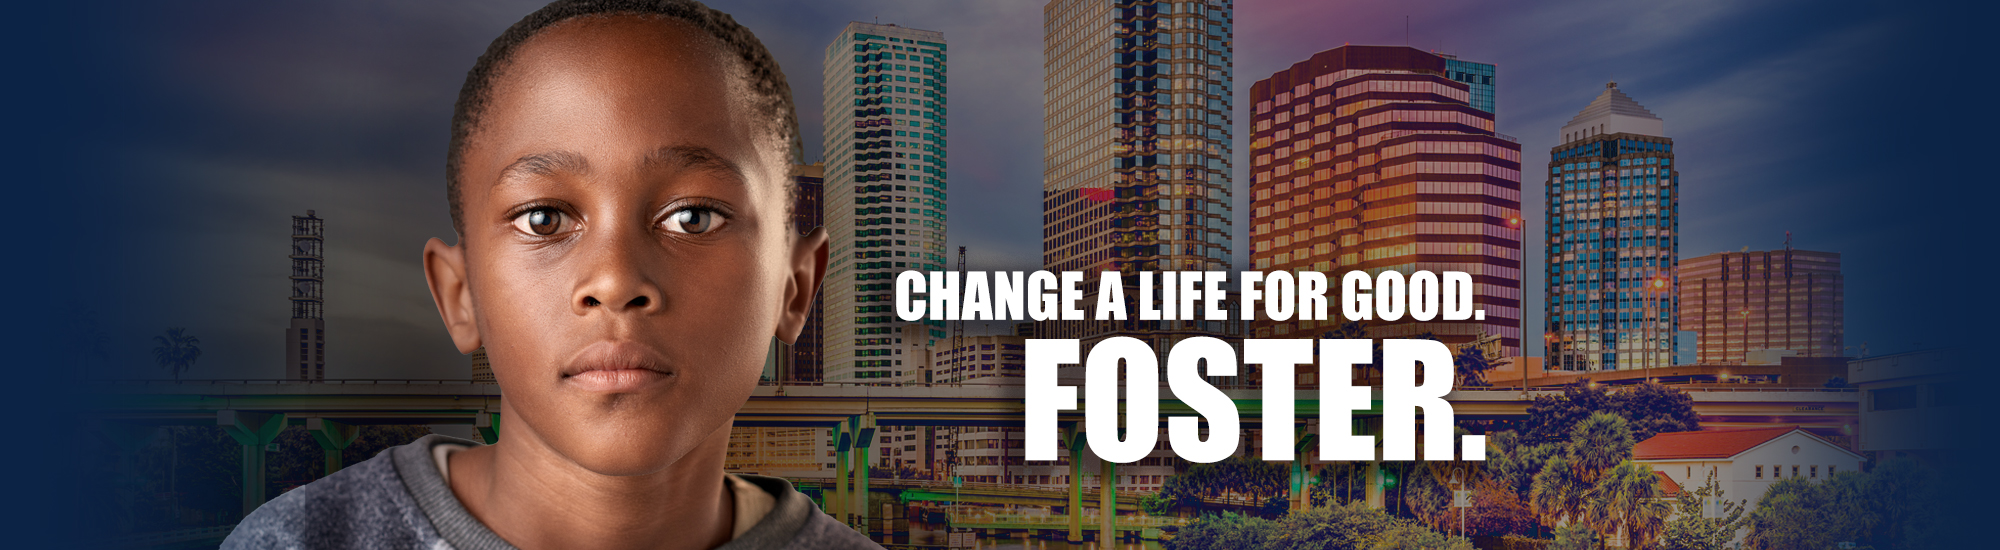 Change a Life for Good – FOSTER.